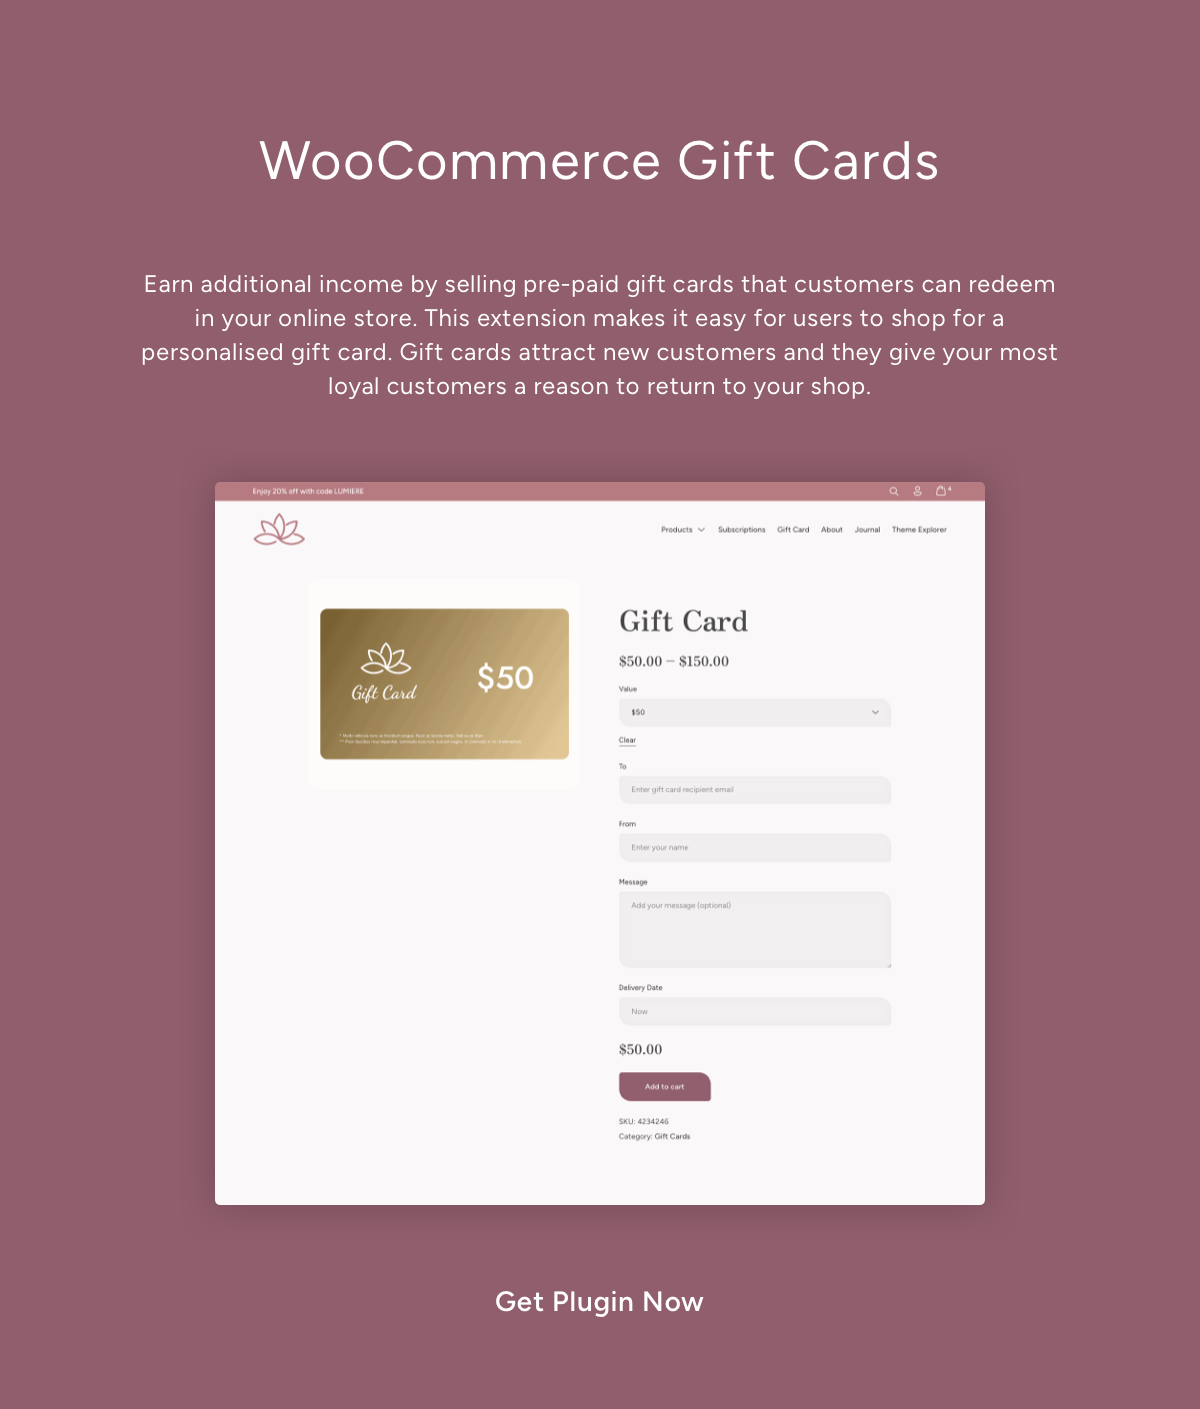 WooCommerce Gift Cards - Earn additional income by selling pre-paid gift cards that customers can redeem in your online store. This extension makes it easy for users to shop for a personalised gift card. Gift cards attract new customers and they give your most loyal customers a reason to return to your shop.